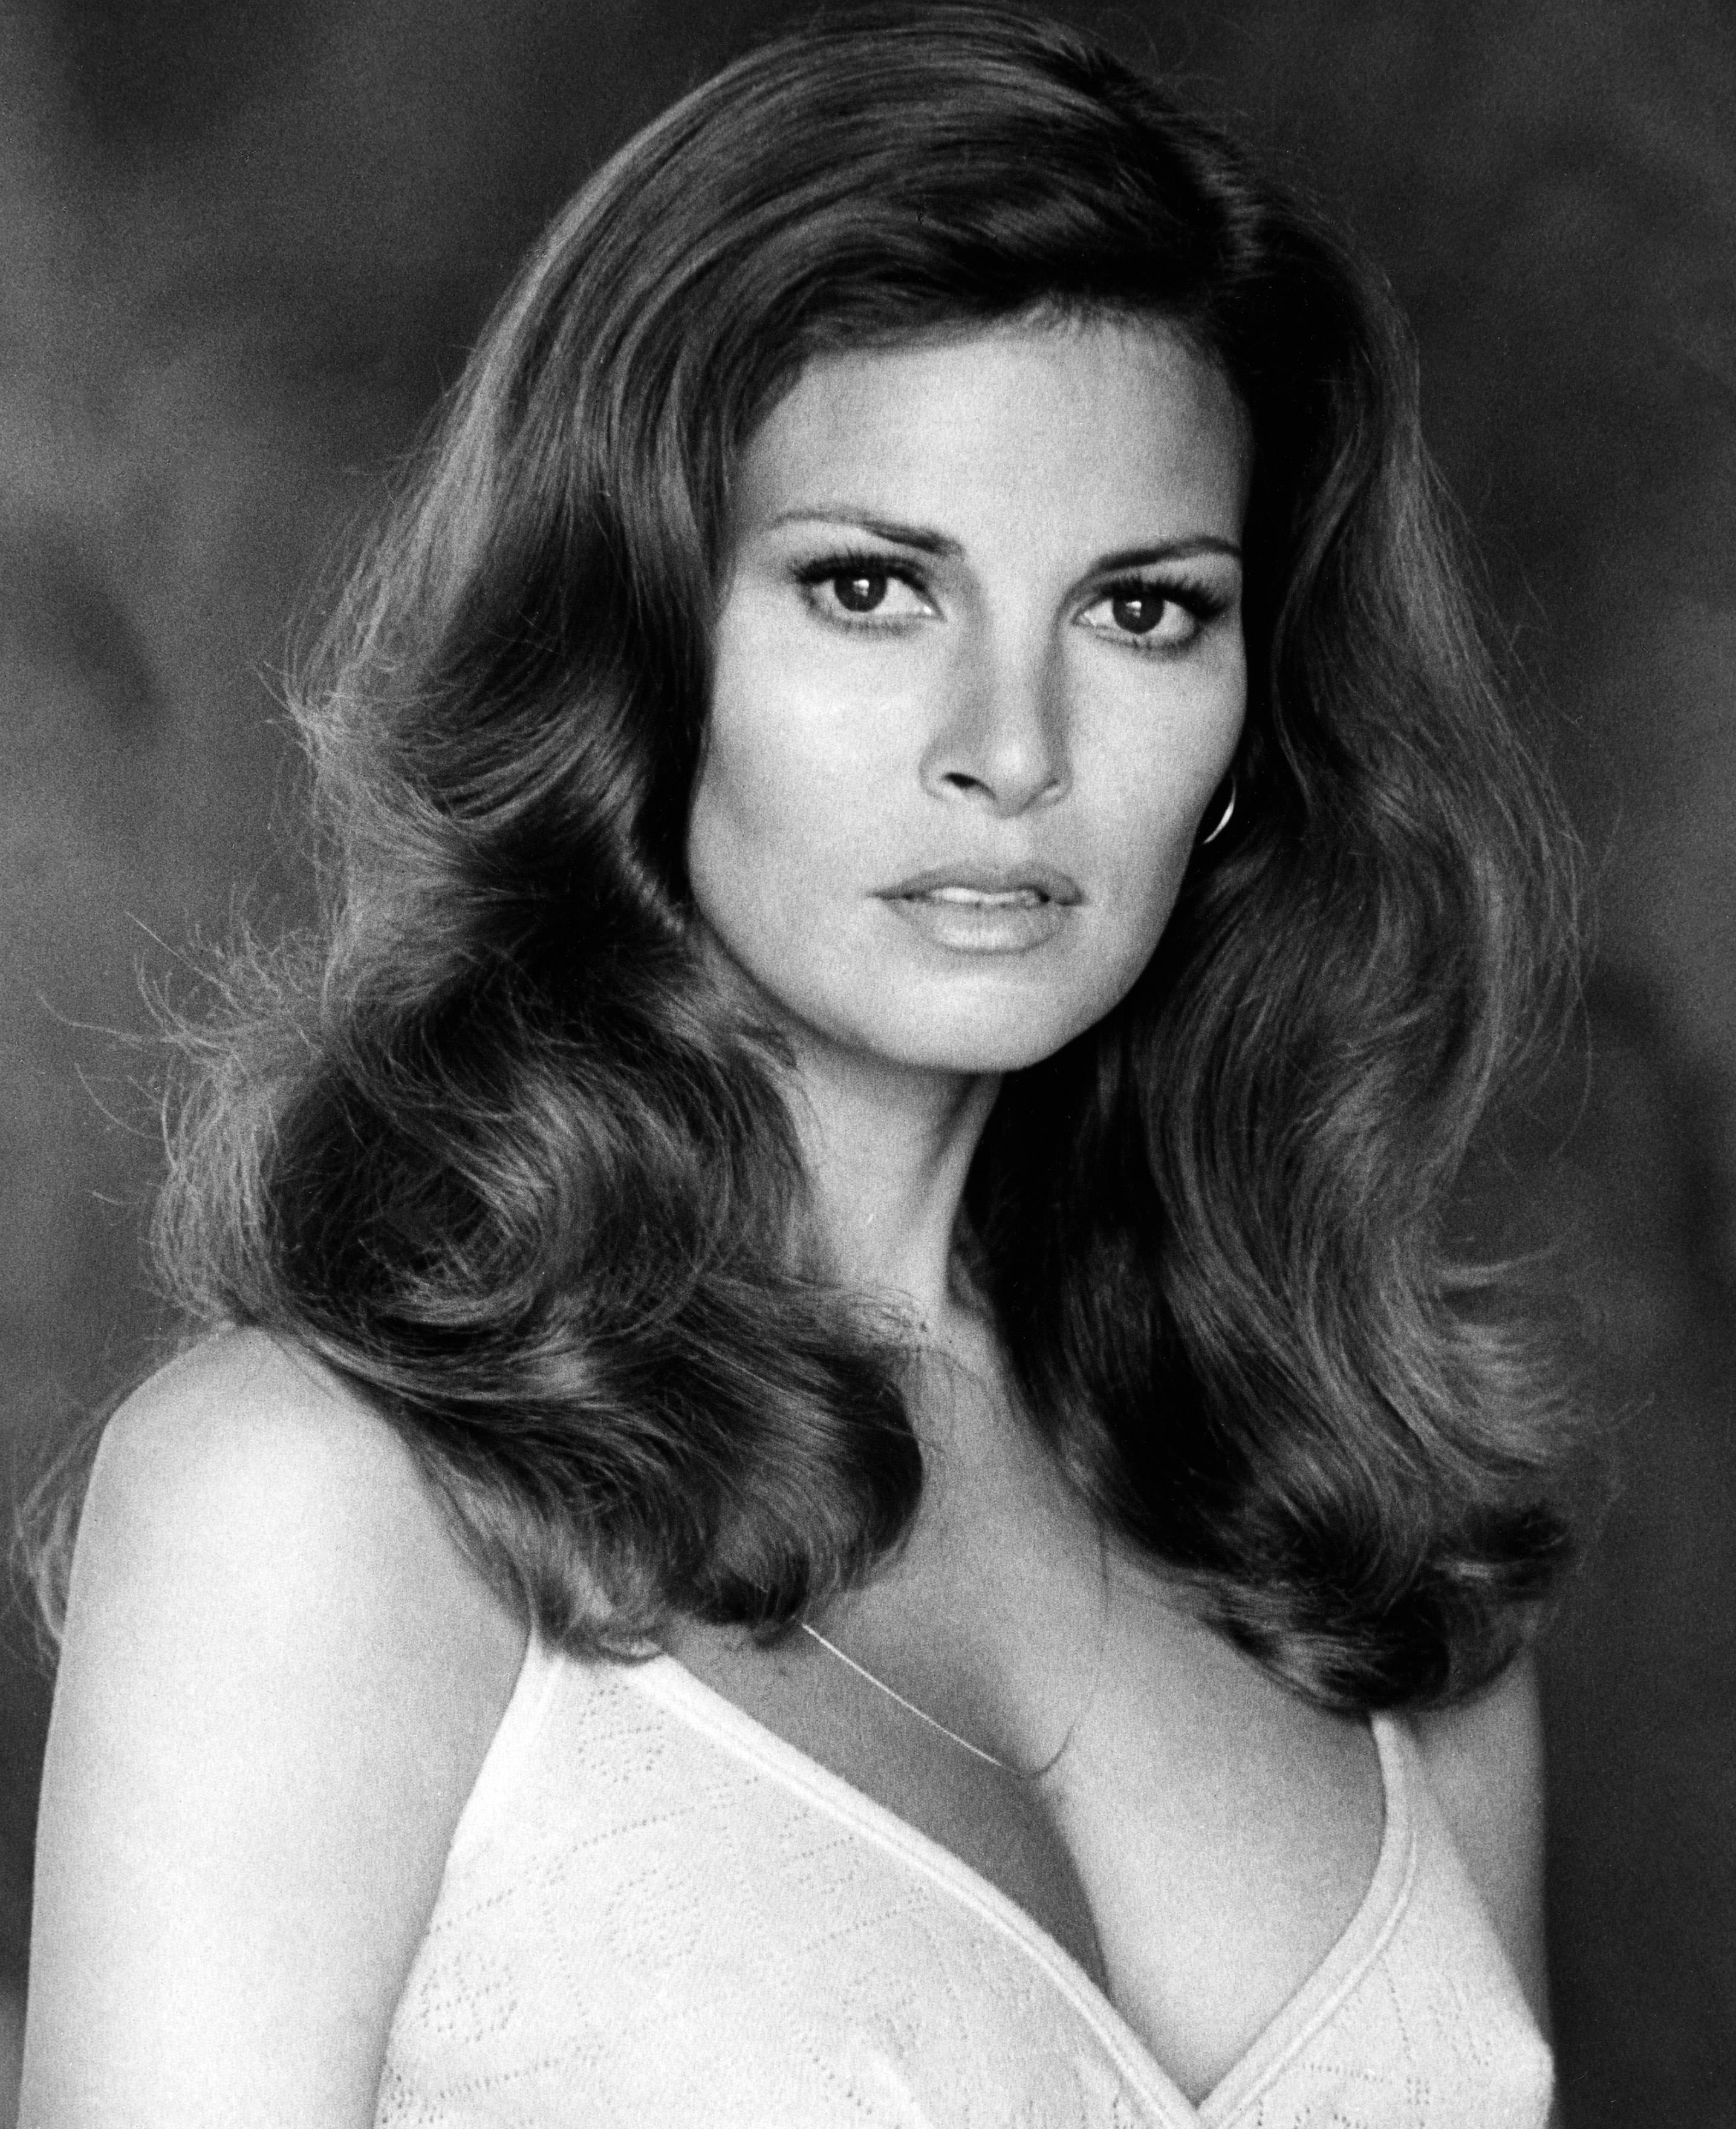 Unknown Black and White Photograph - Raquel Welch Glamour in the Studio Globe Photos Fine Art Print